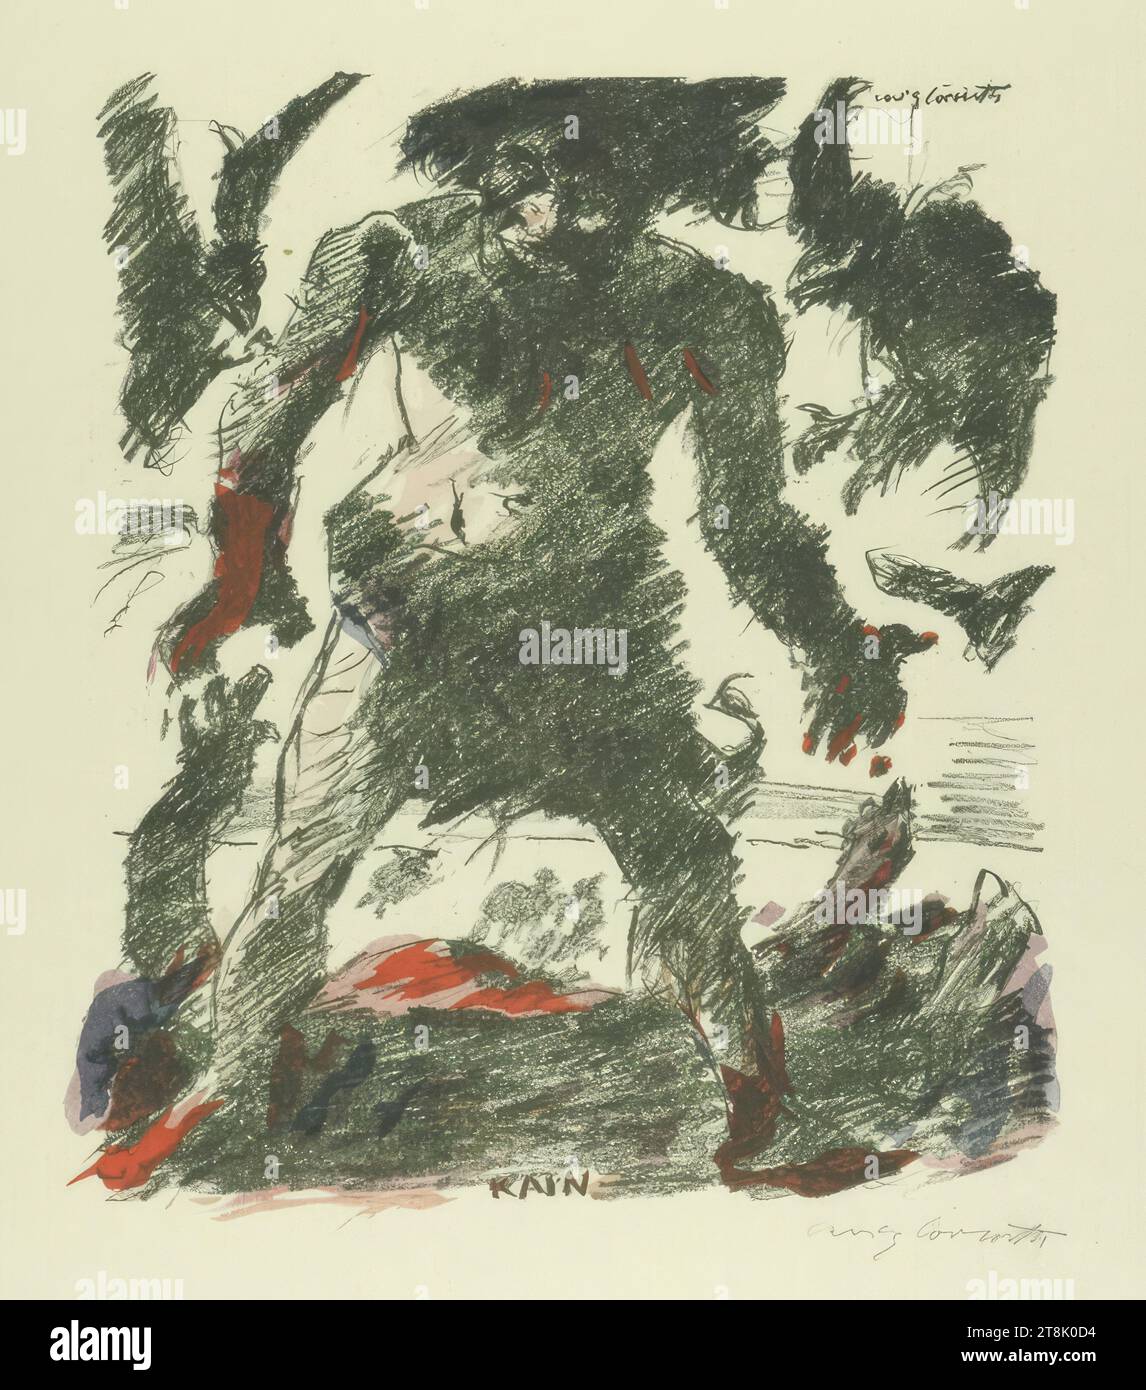 Cain, from: 'War and Art. Original stone drawings of the Berlin Secession' folder 20, Lovis Corinth, Tapiau 1858 - 1925 Zandvoort, 1915 - 1917, prints, lithography Stock Photo